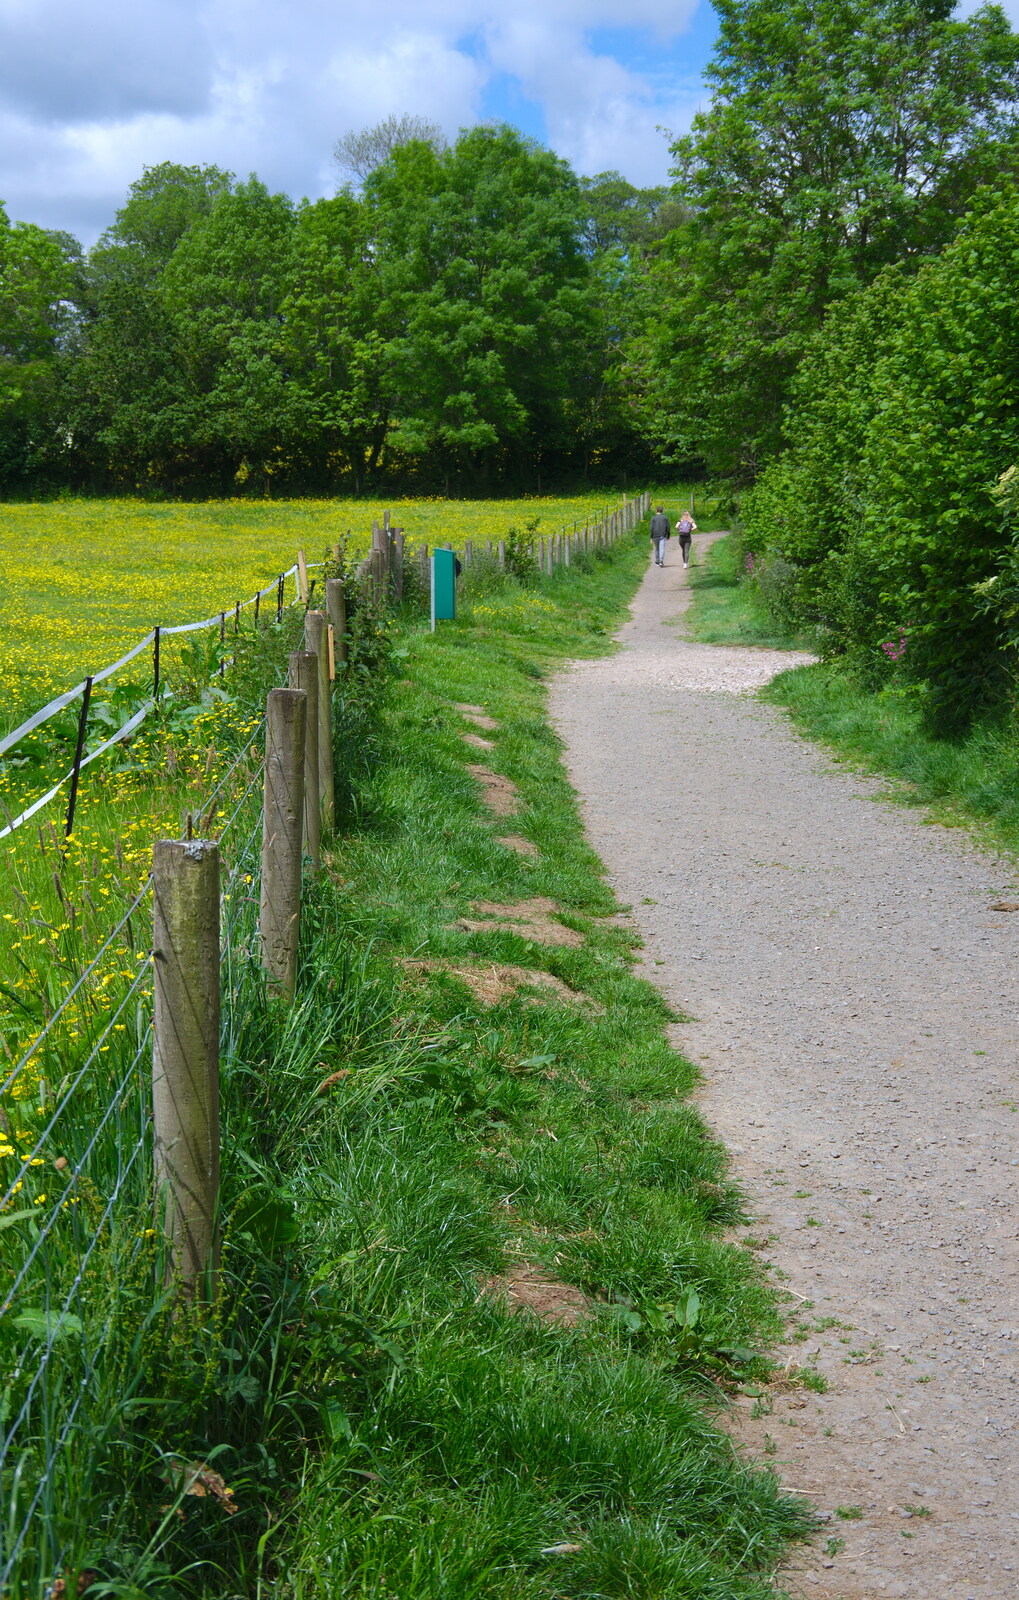 Chagford Lido and a Trip to Parke, Bovey Tracey, Devon - 25th May 2019: A nice path